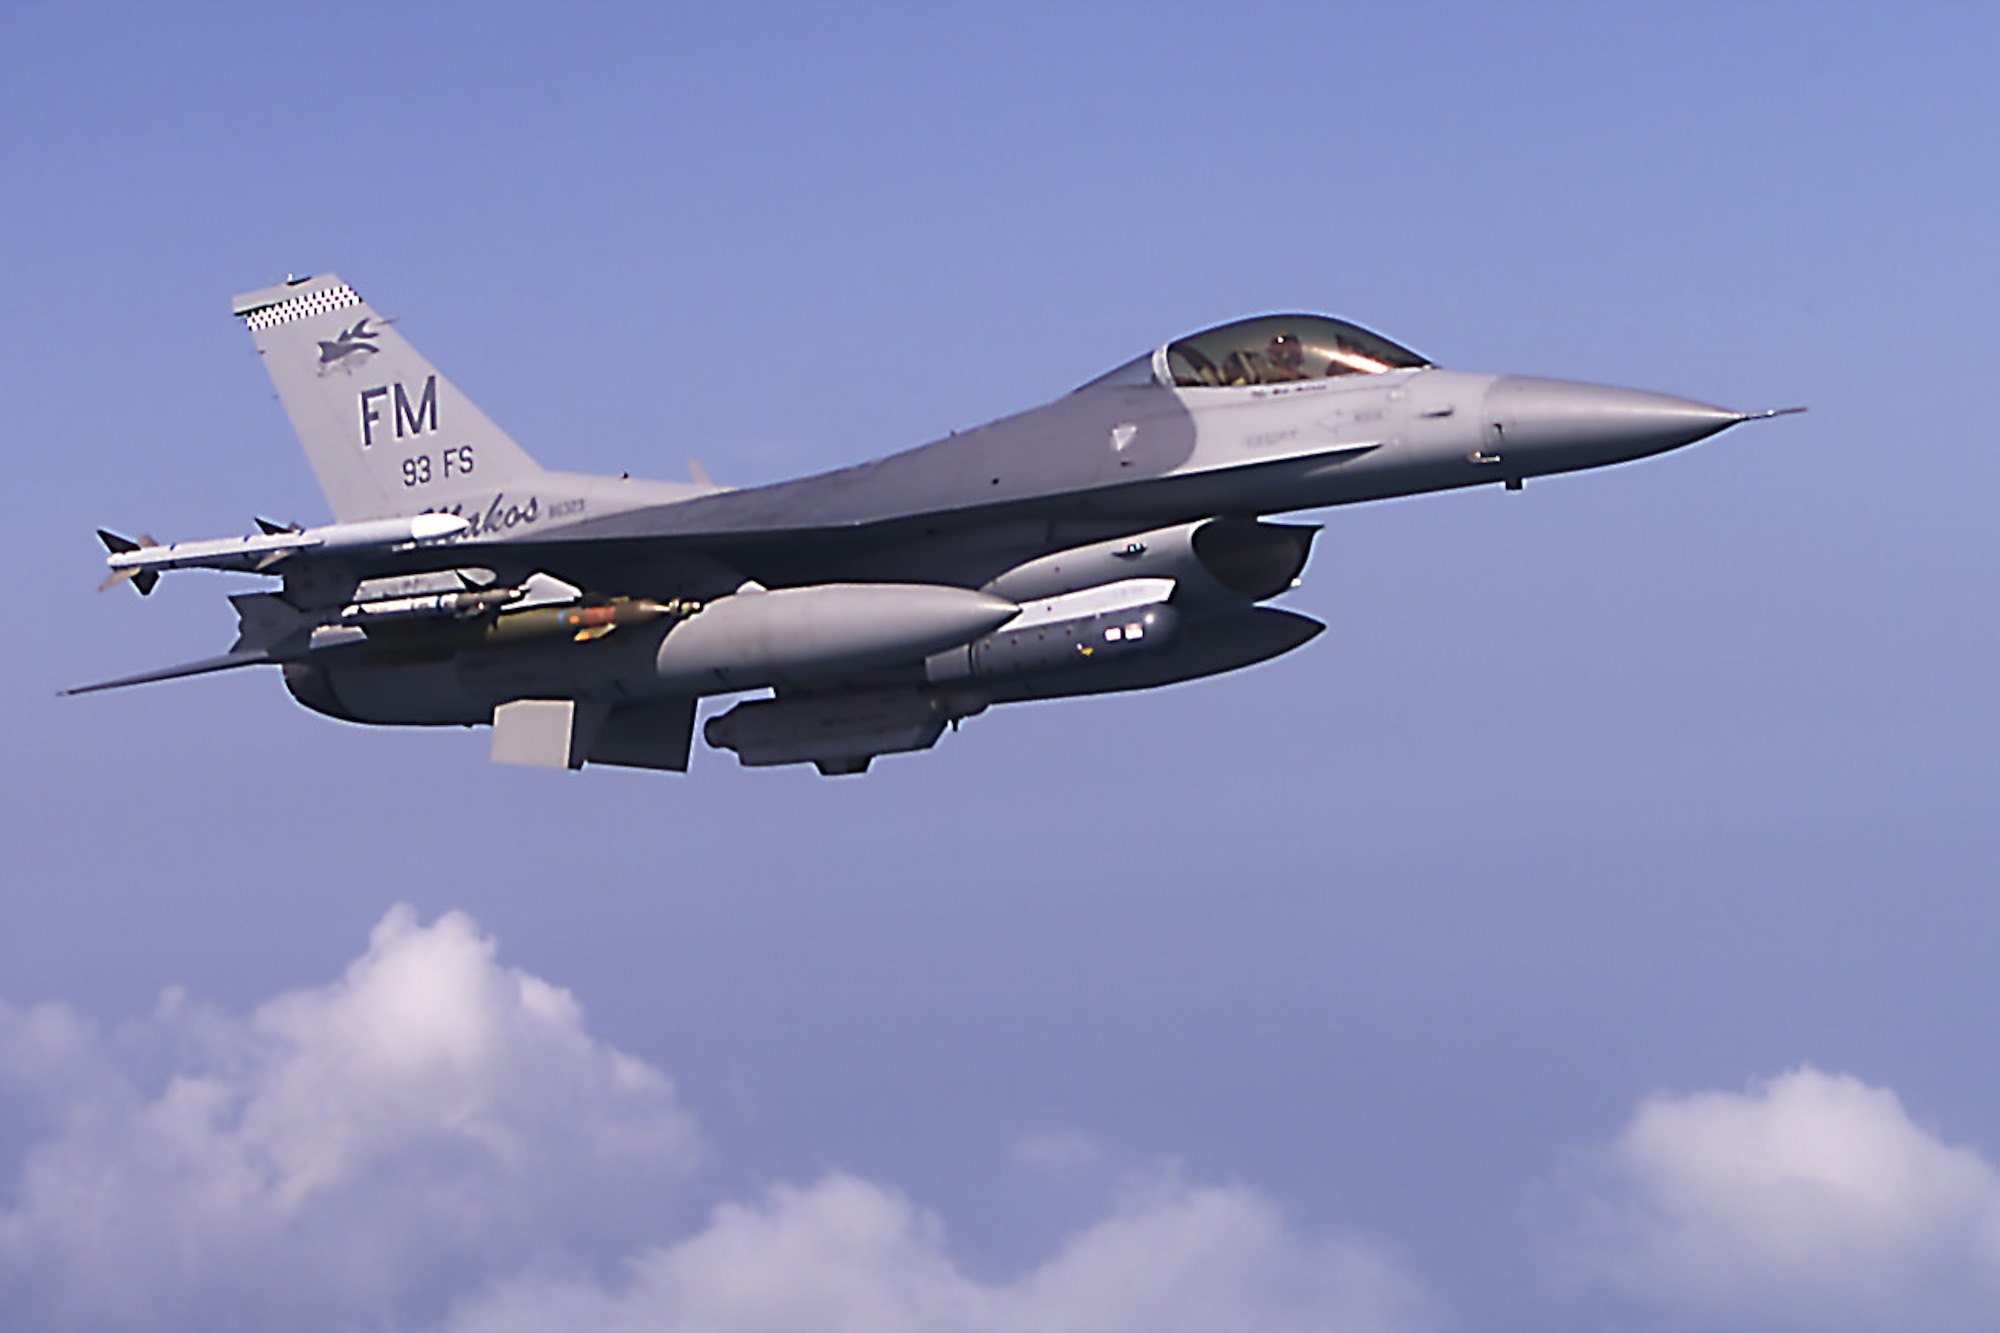 482nd Fighter Wing / 93rd Fighter Squadron Lockheed F-16C Fighting Falcon carrying an Aim-120, and Aim-9 air-to-air missiles, a single GBU-12 and a Lighting Targeting pod.  The aircraft is normally based at Homestead Air Reserve Station and was flying near the Southern Flordia coastline. (Photo by: MSgt Joe Cupido, 4th Combat Camera)